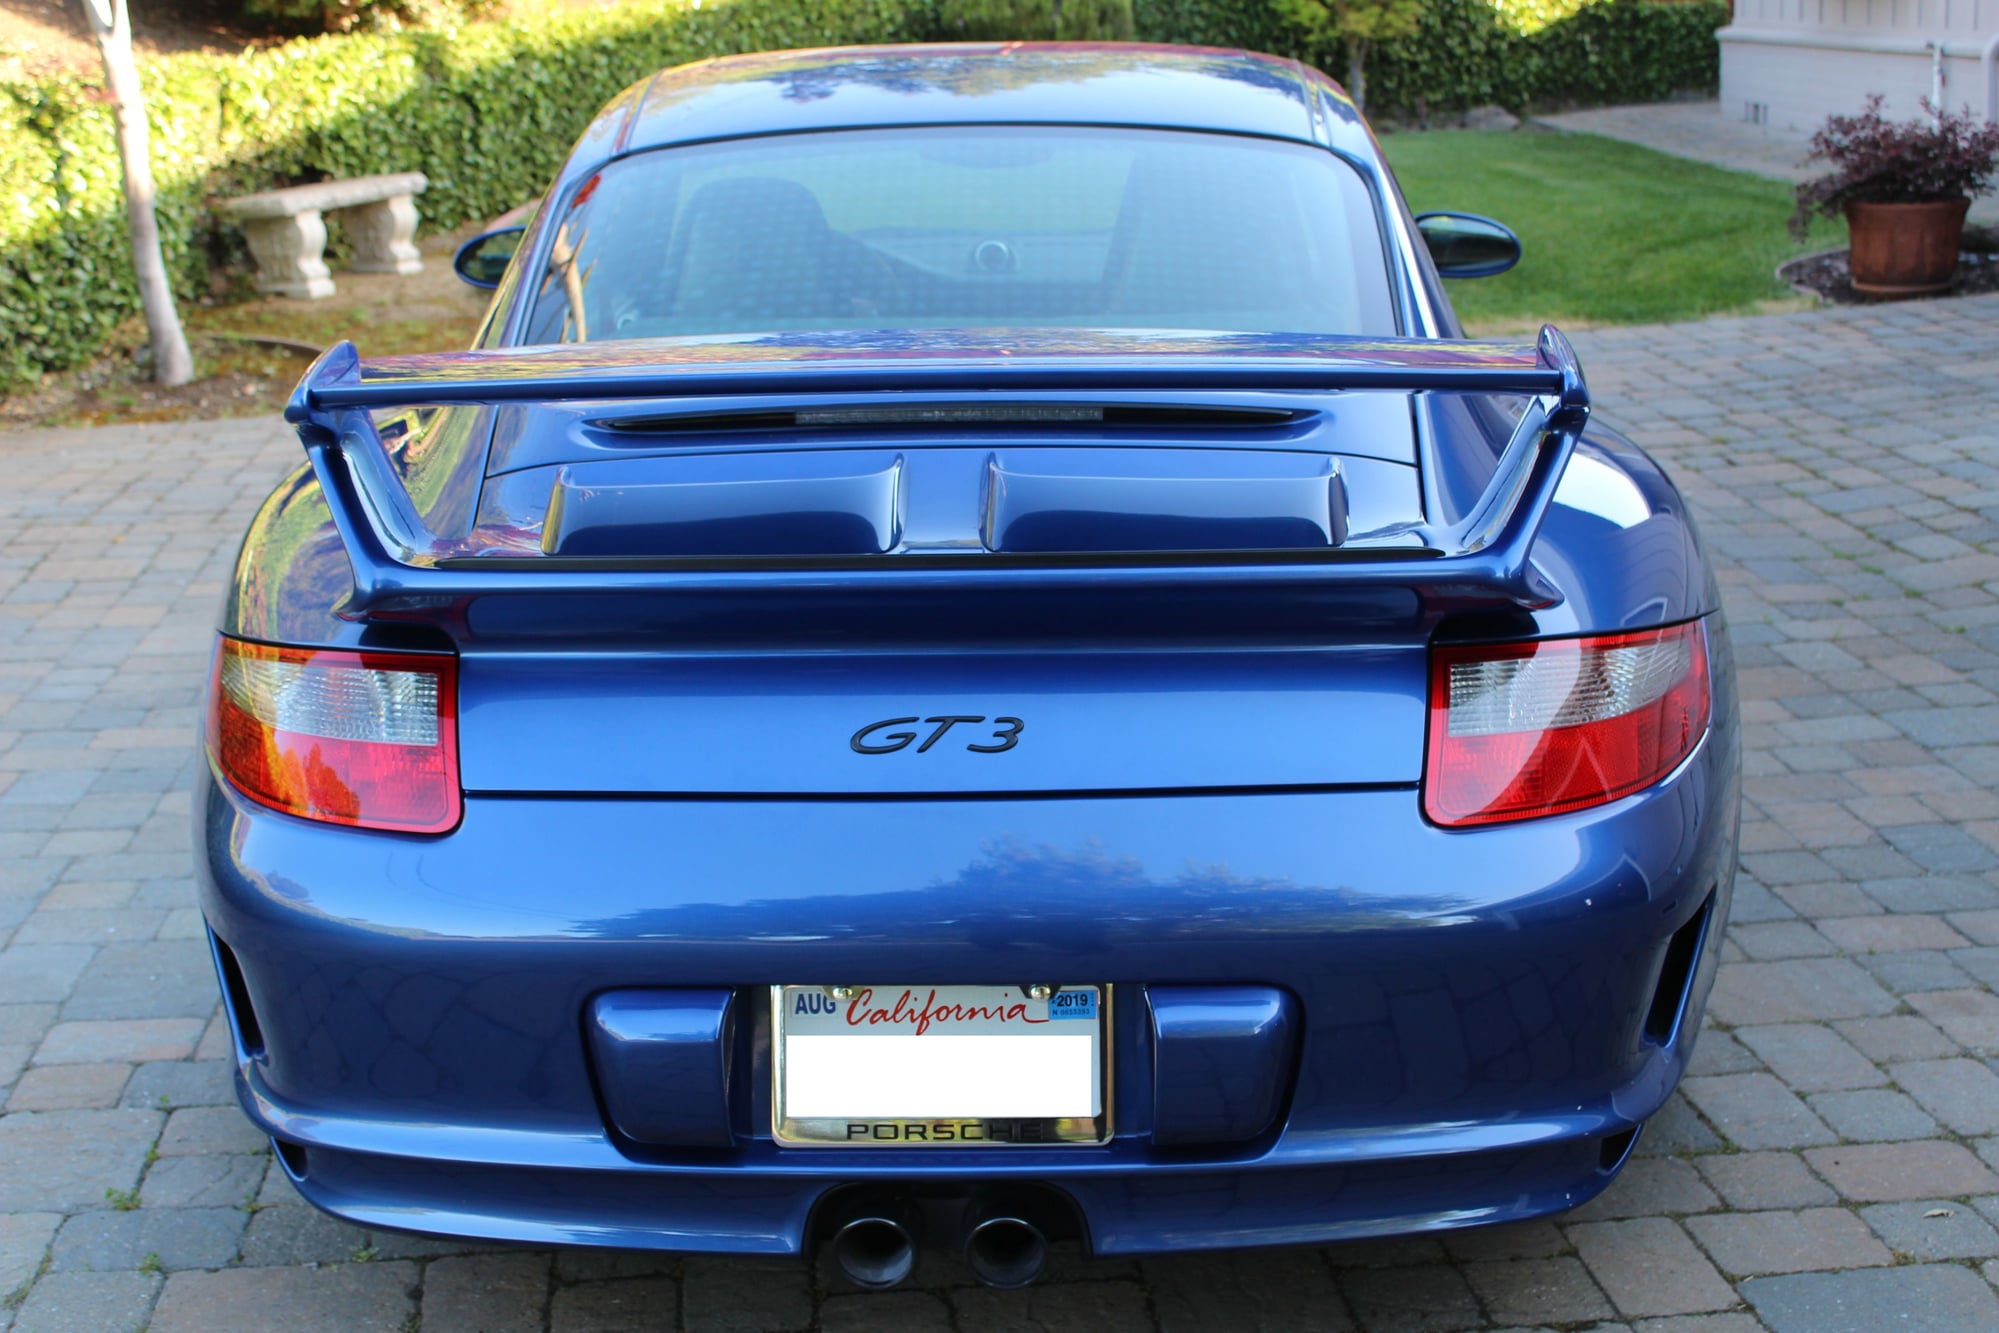 2007 Porsche GT3 - FS: 2007 GT3 (997.1) Beautiful & Rare Cobalt Blue 12,xxx miles - Used - VIN WP0AC29997S793001 - 12,700 Miles - 6 cyl - 2WD - Manual - Coupe - Blue - Sf Bay Area, CA 94002, United States